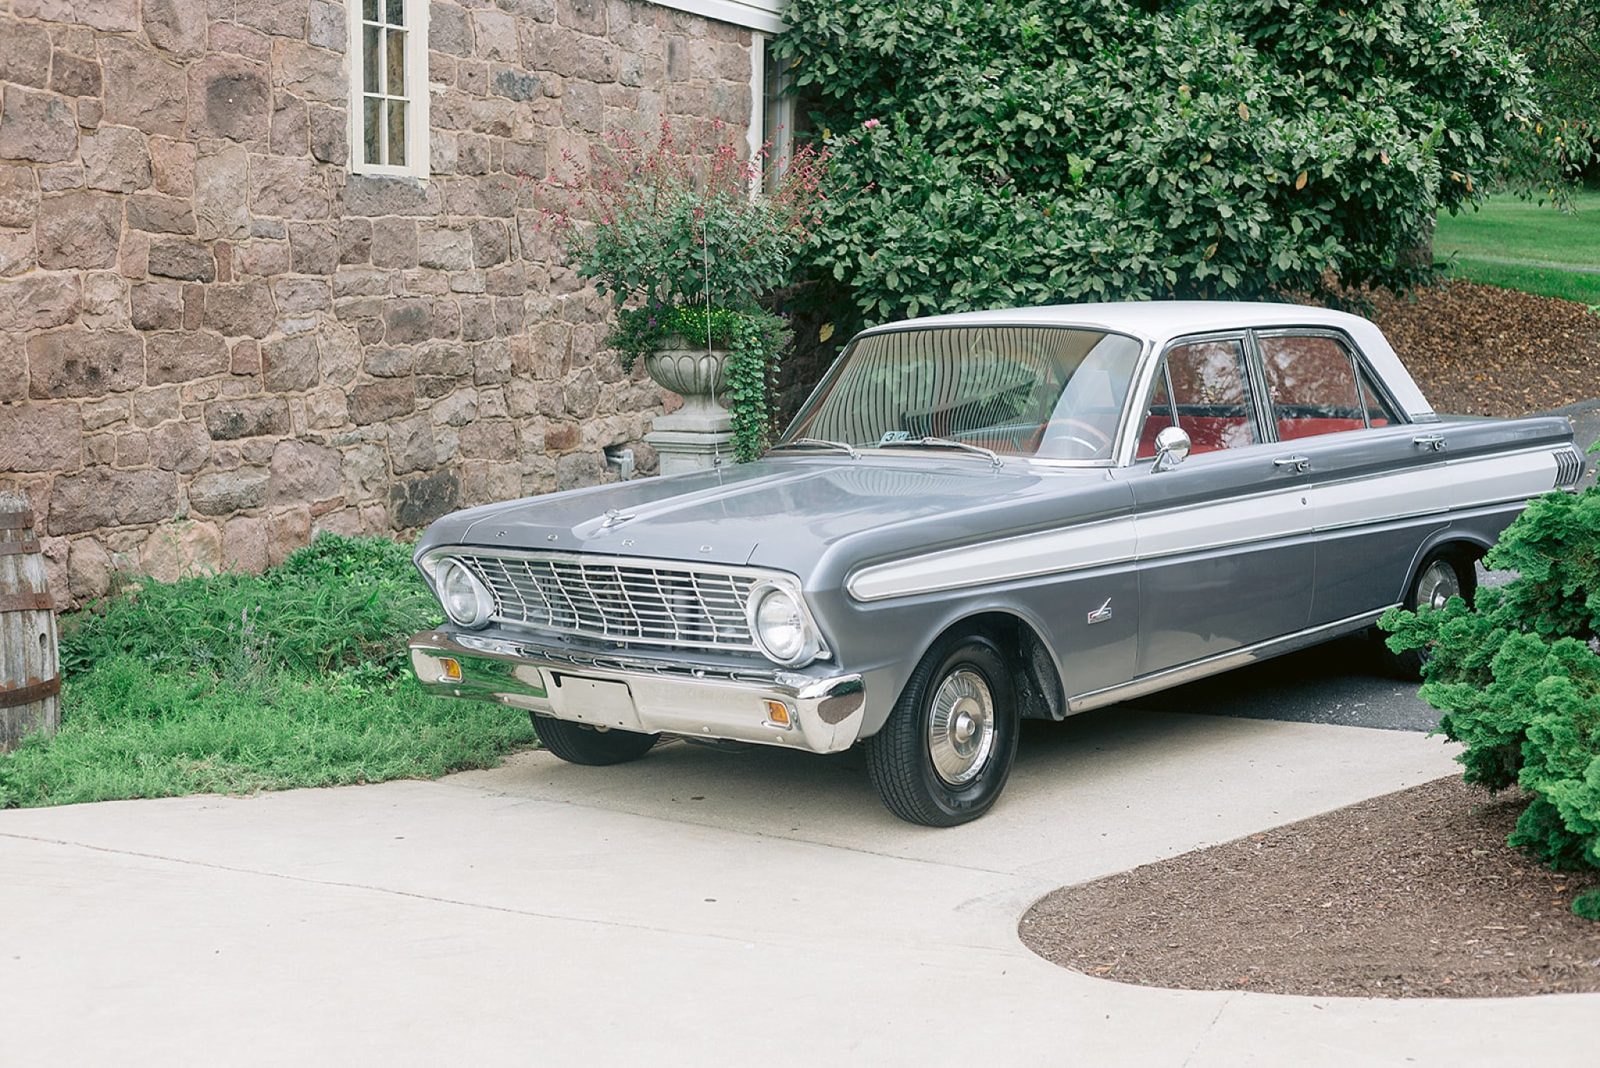 classic ford car used as getaway car at end of wedding reception